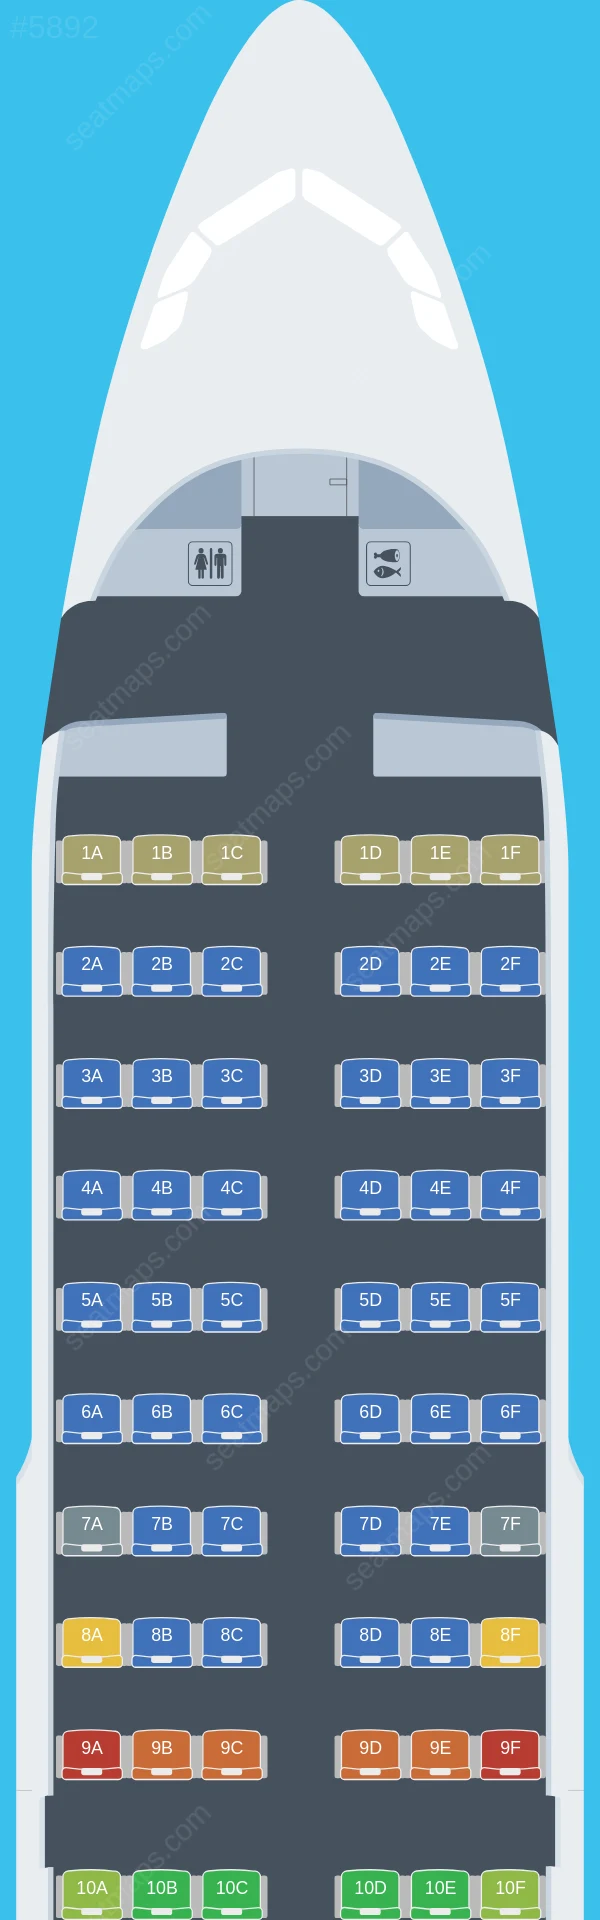 LATAM Airlines Colombia Airbus A319-100 seatmap preview